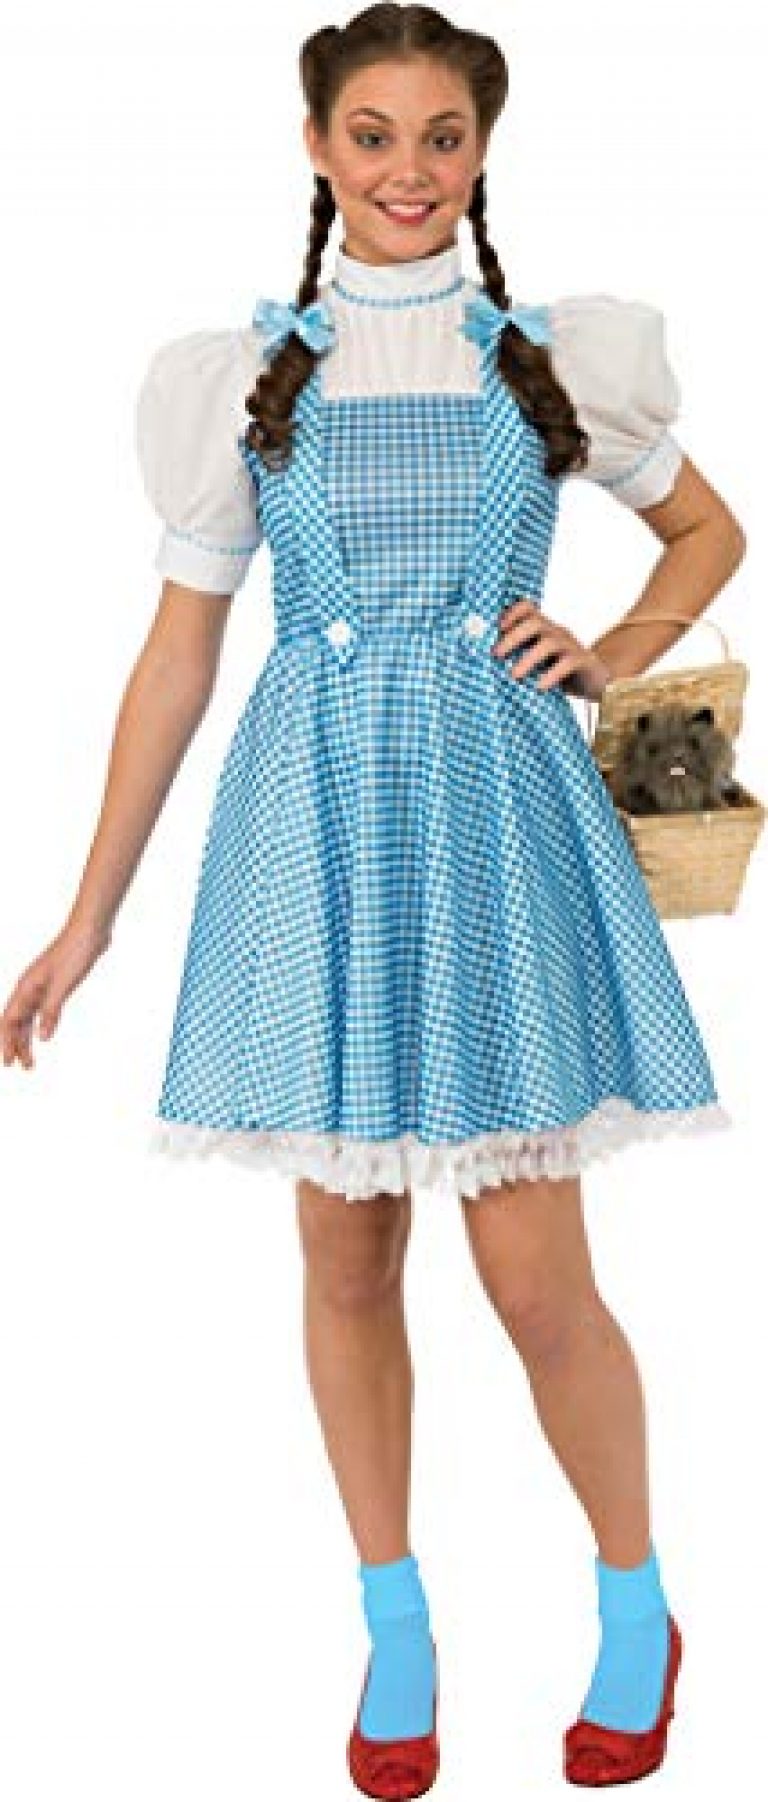 Rubie's womens Wizard of Oz Dorothy Dress and Hair Bows Adult Sized Costumes, Blue/White, Standard US 1